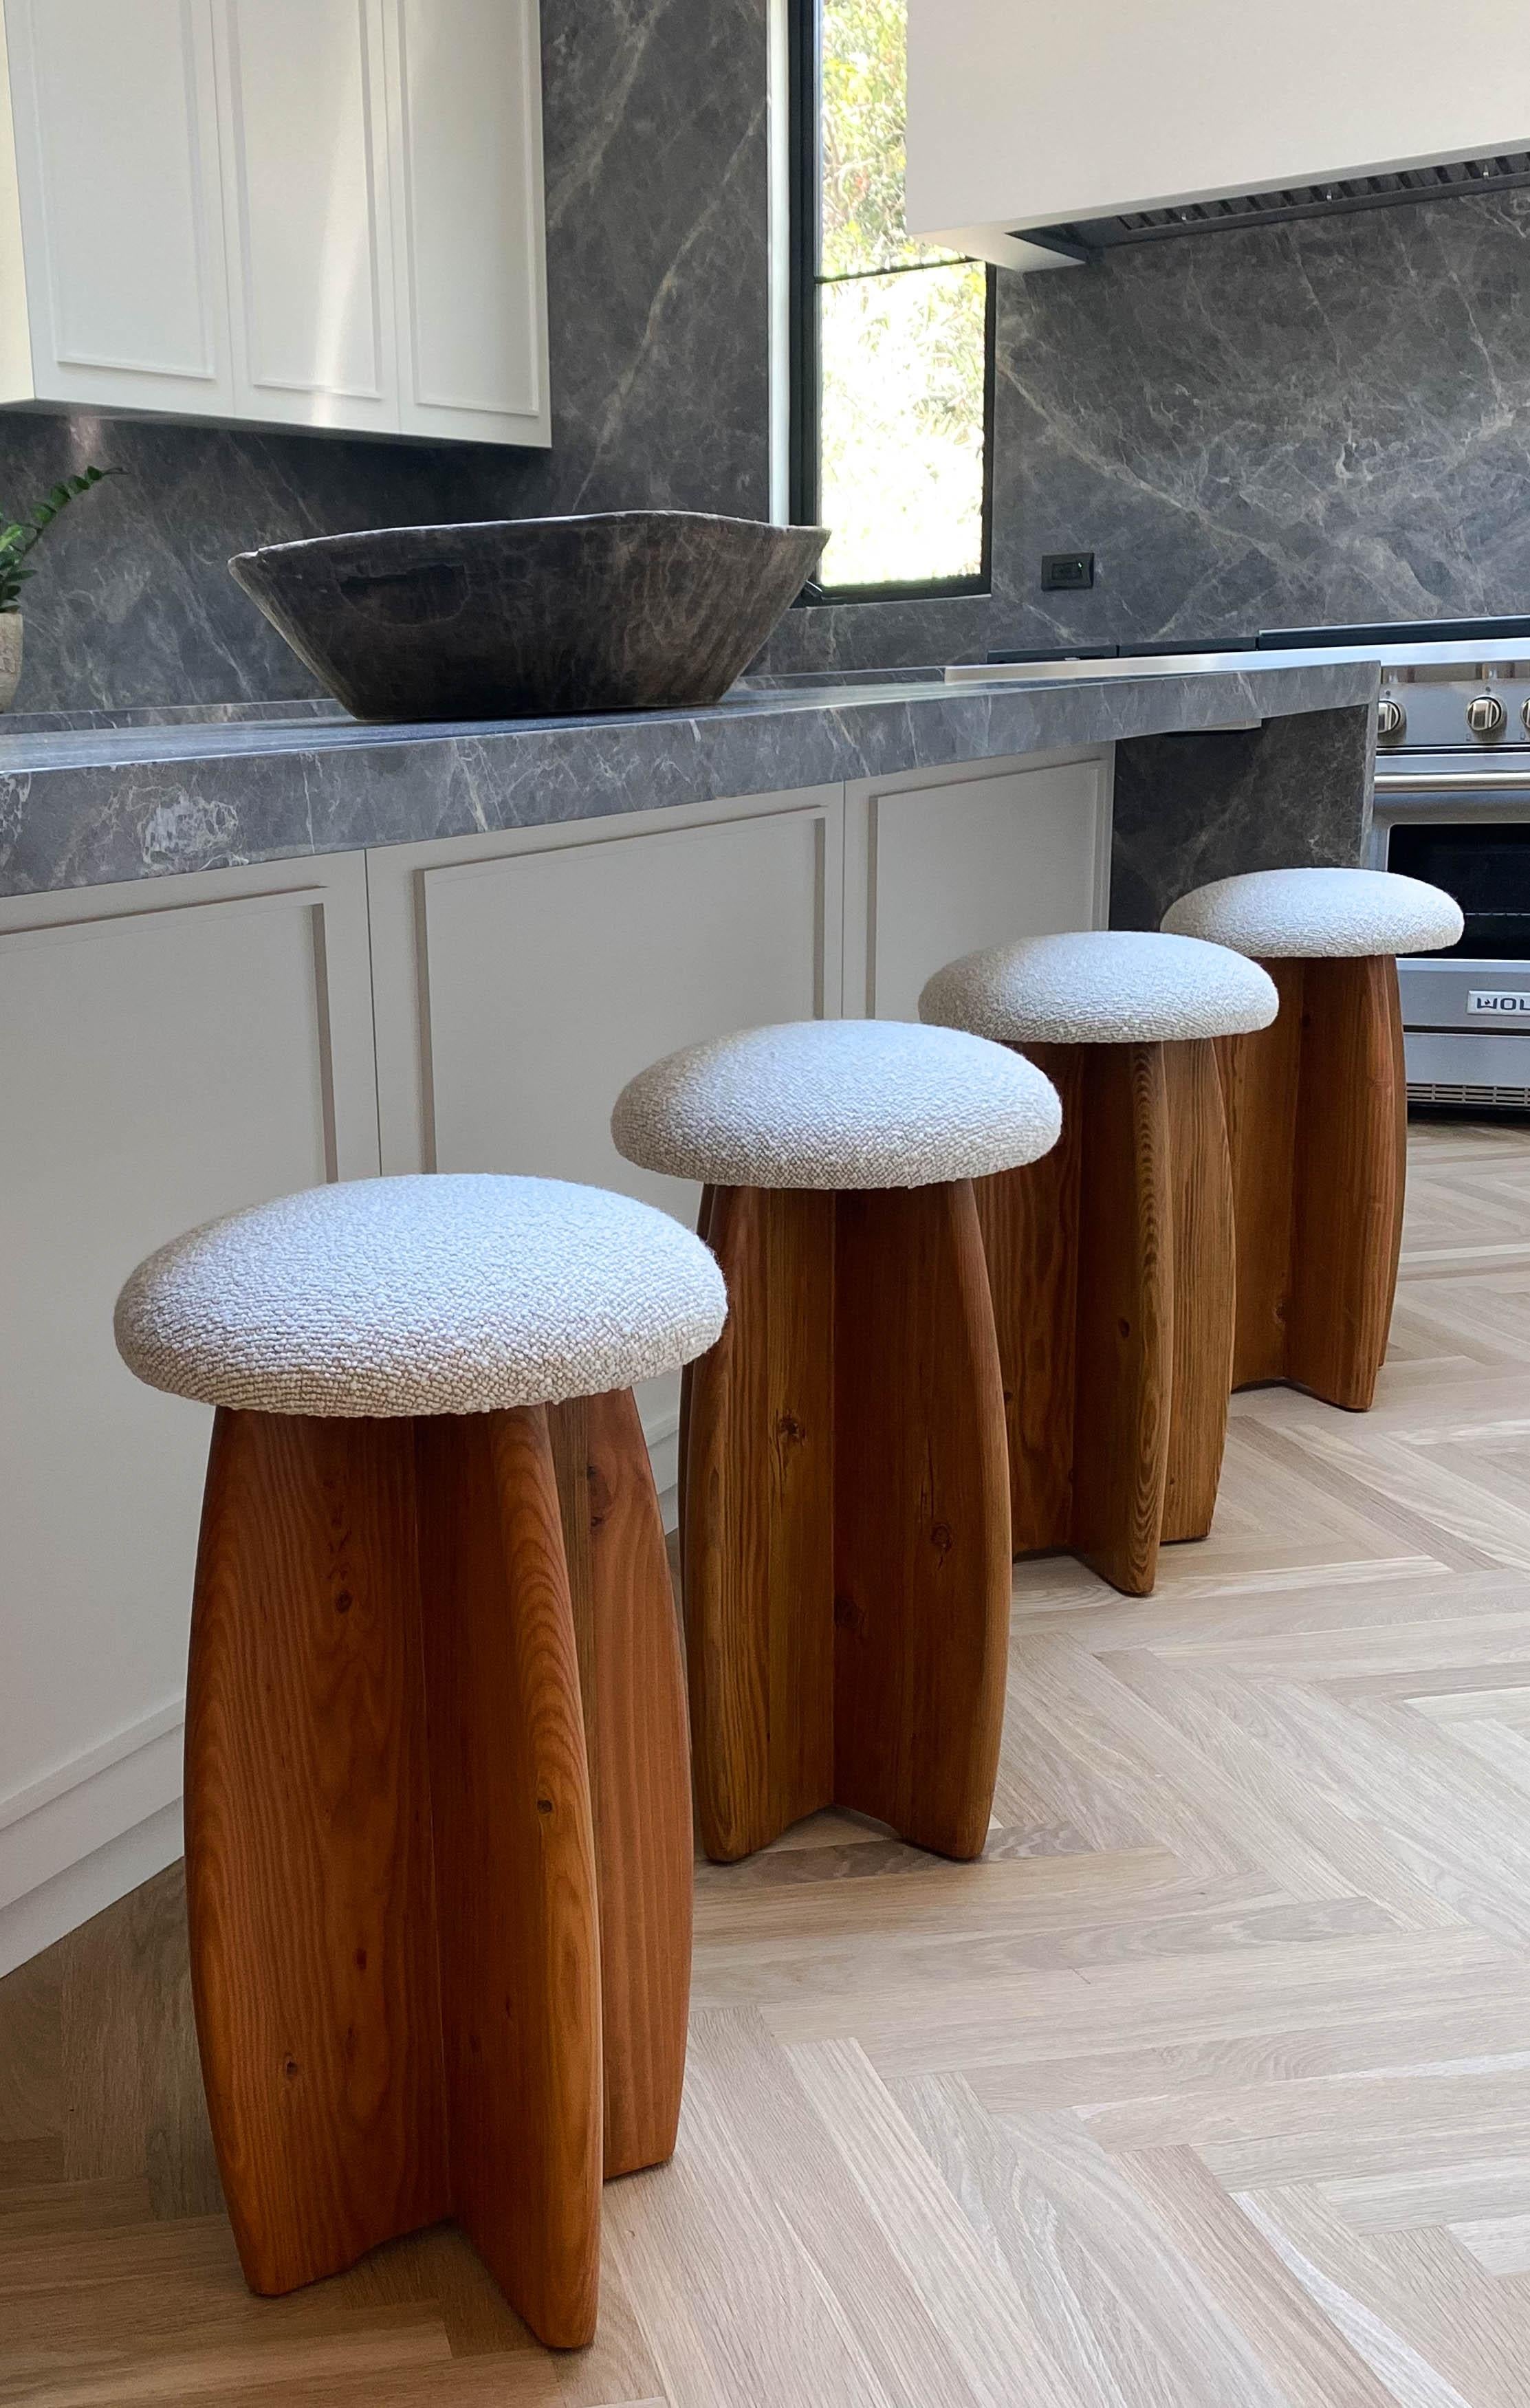 American Studio Osklo Stool 1, Counter Height in Knotty Pine